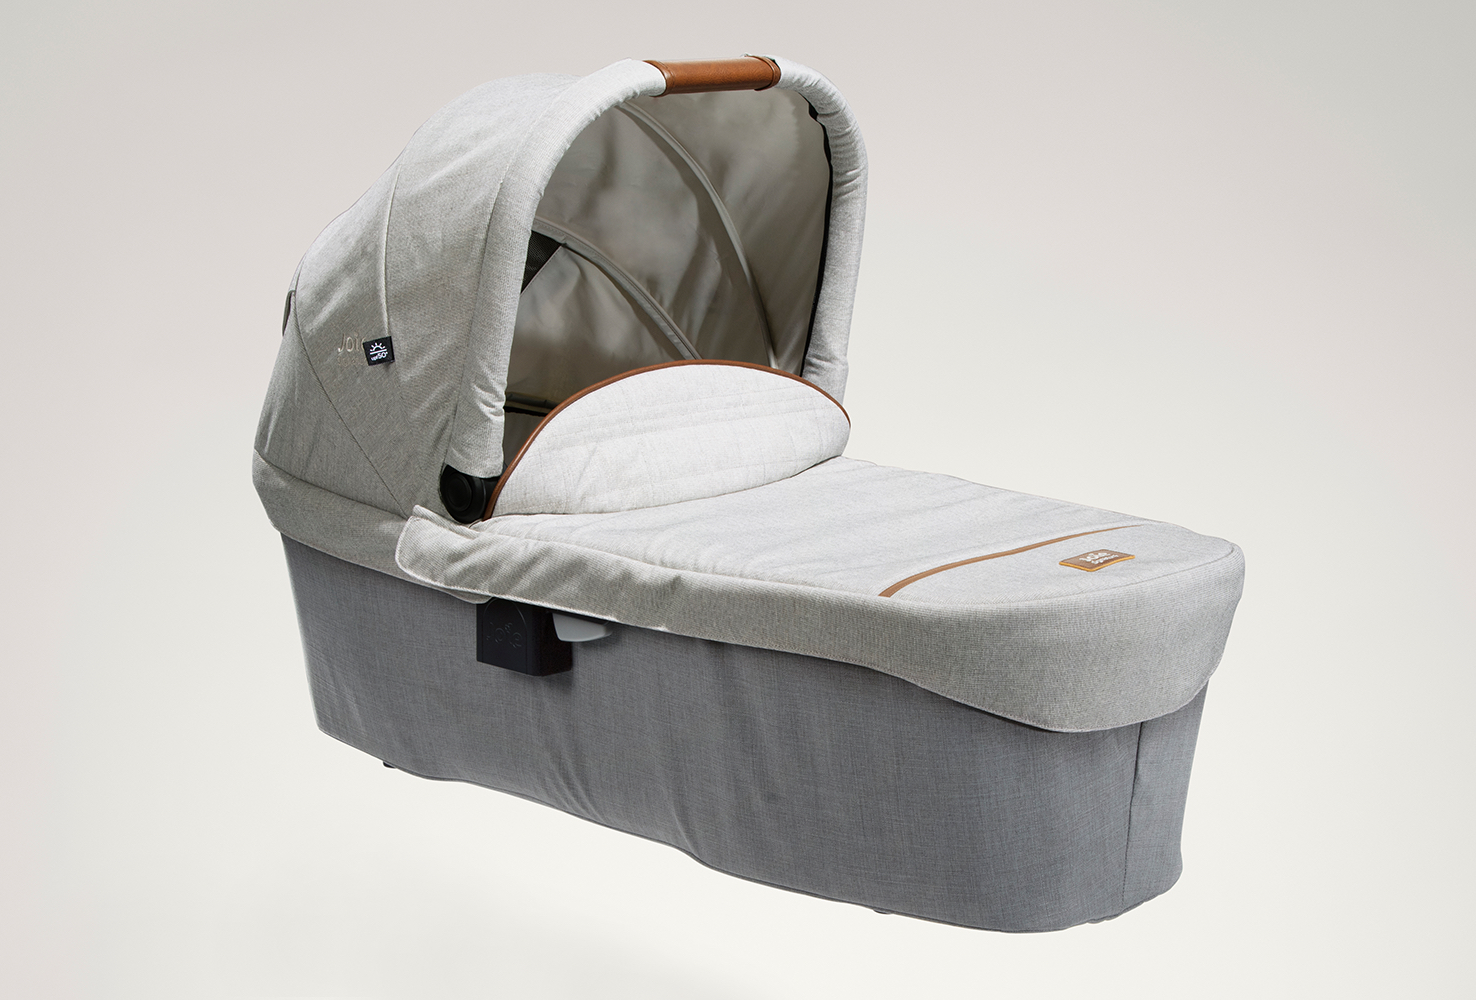 Gray Joie Signature Ramble XL carry cot facing toward the right at an angle.